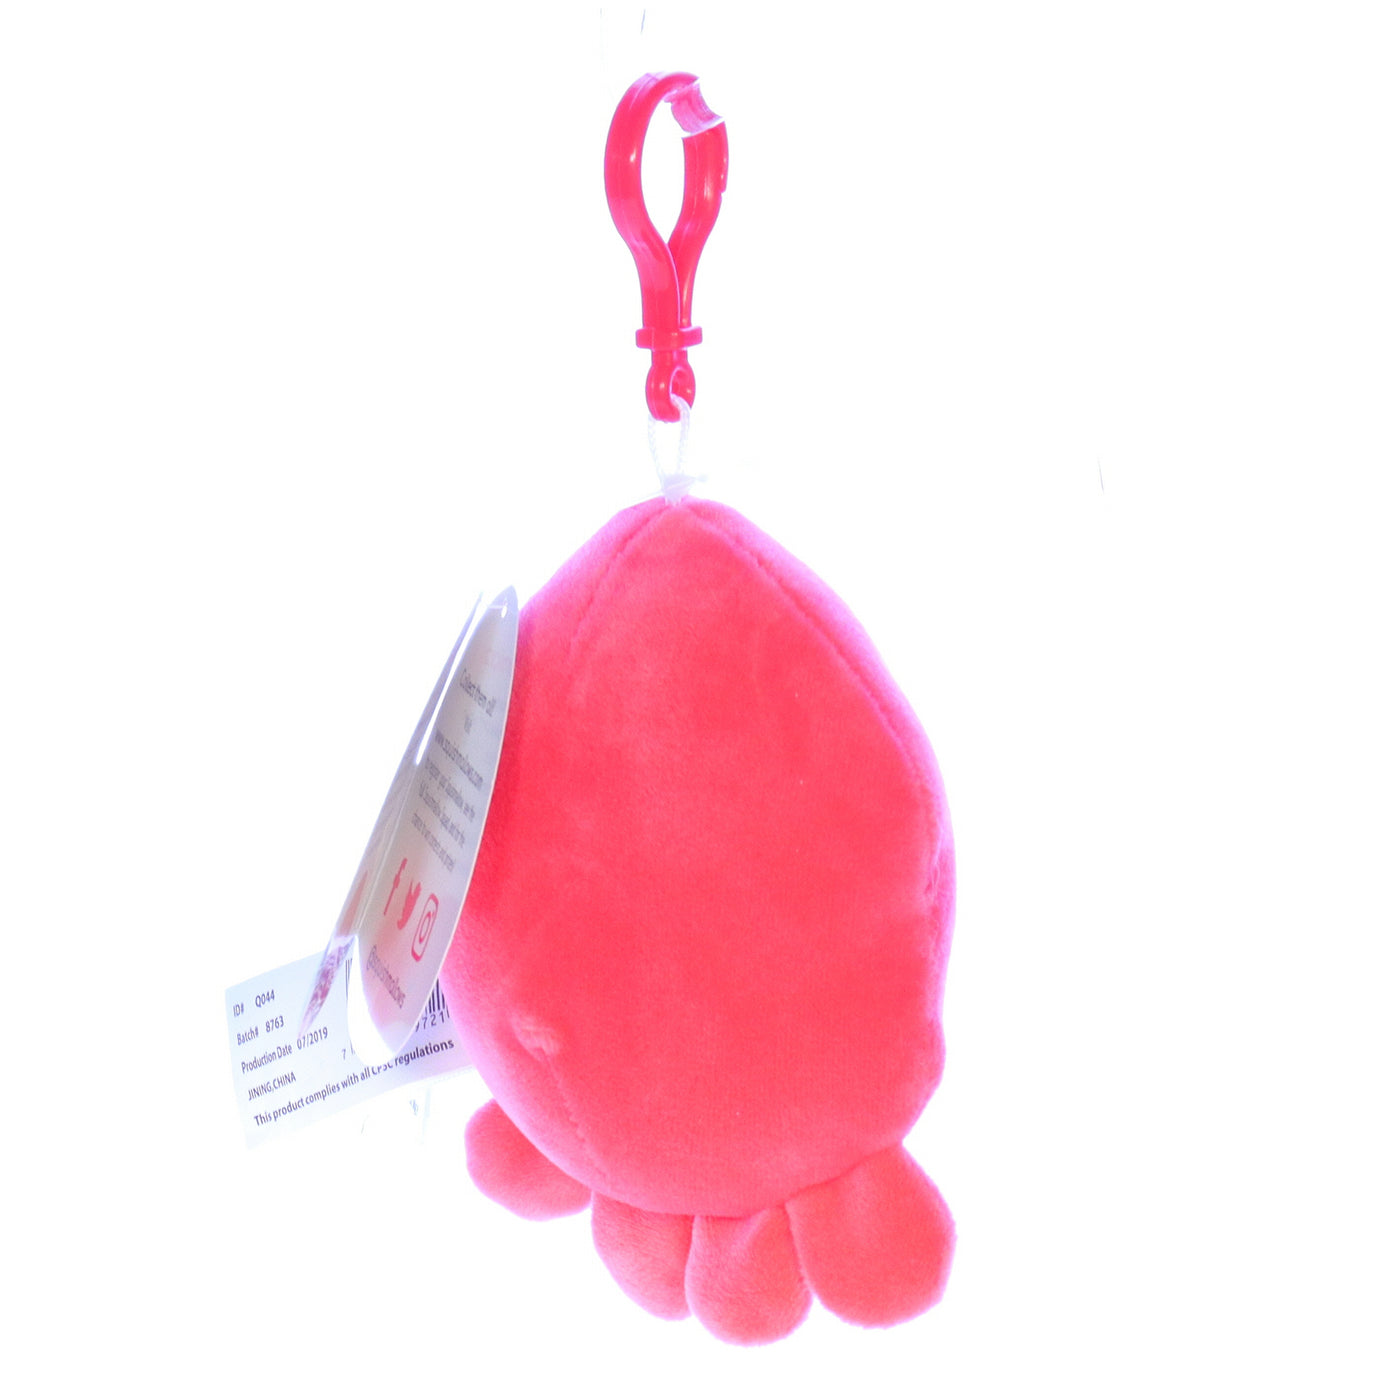 Squishmallows_Q044_Veronica_Keychain_Octopus_Stuffed_Animal_2019 Back Right View